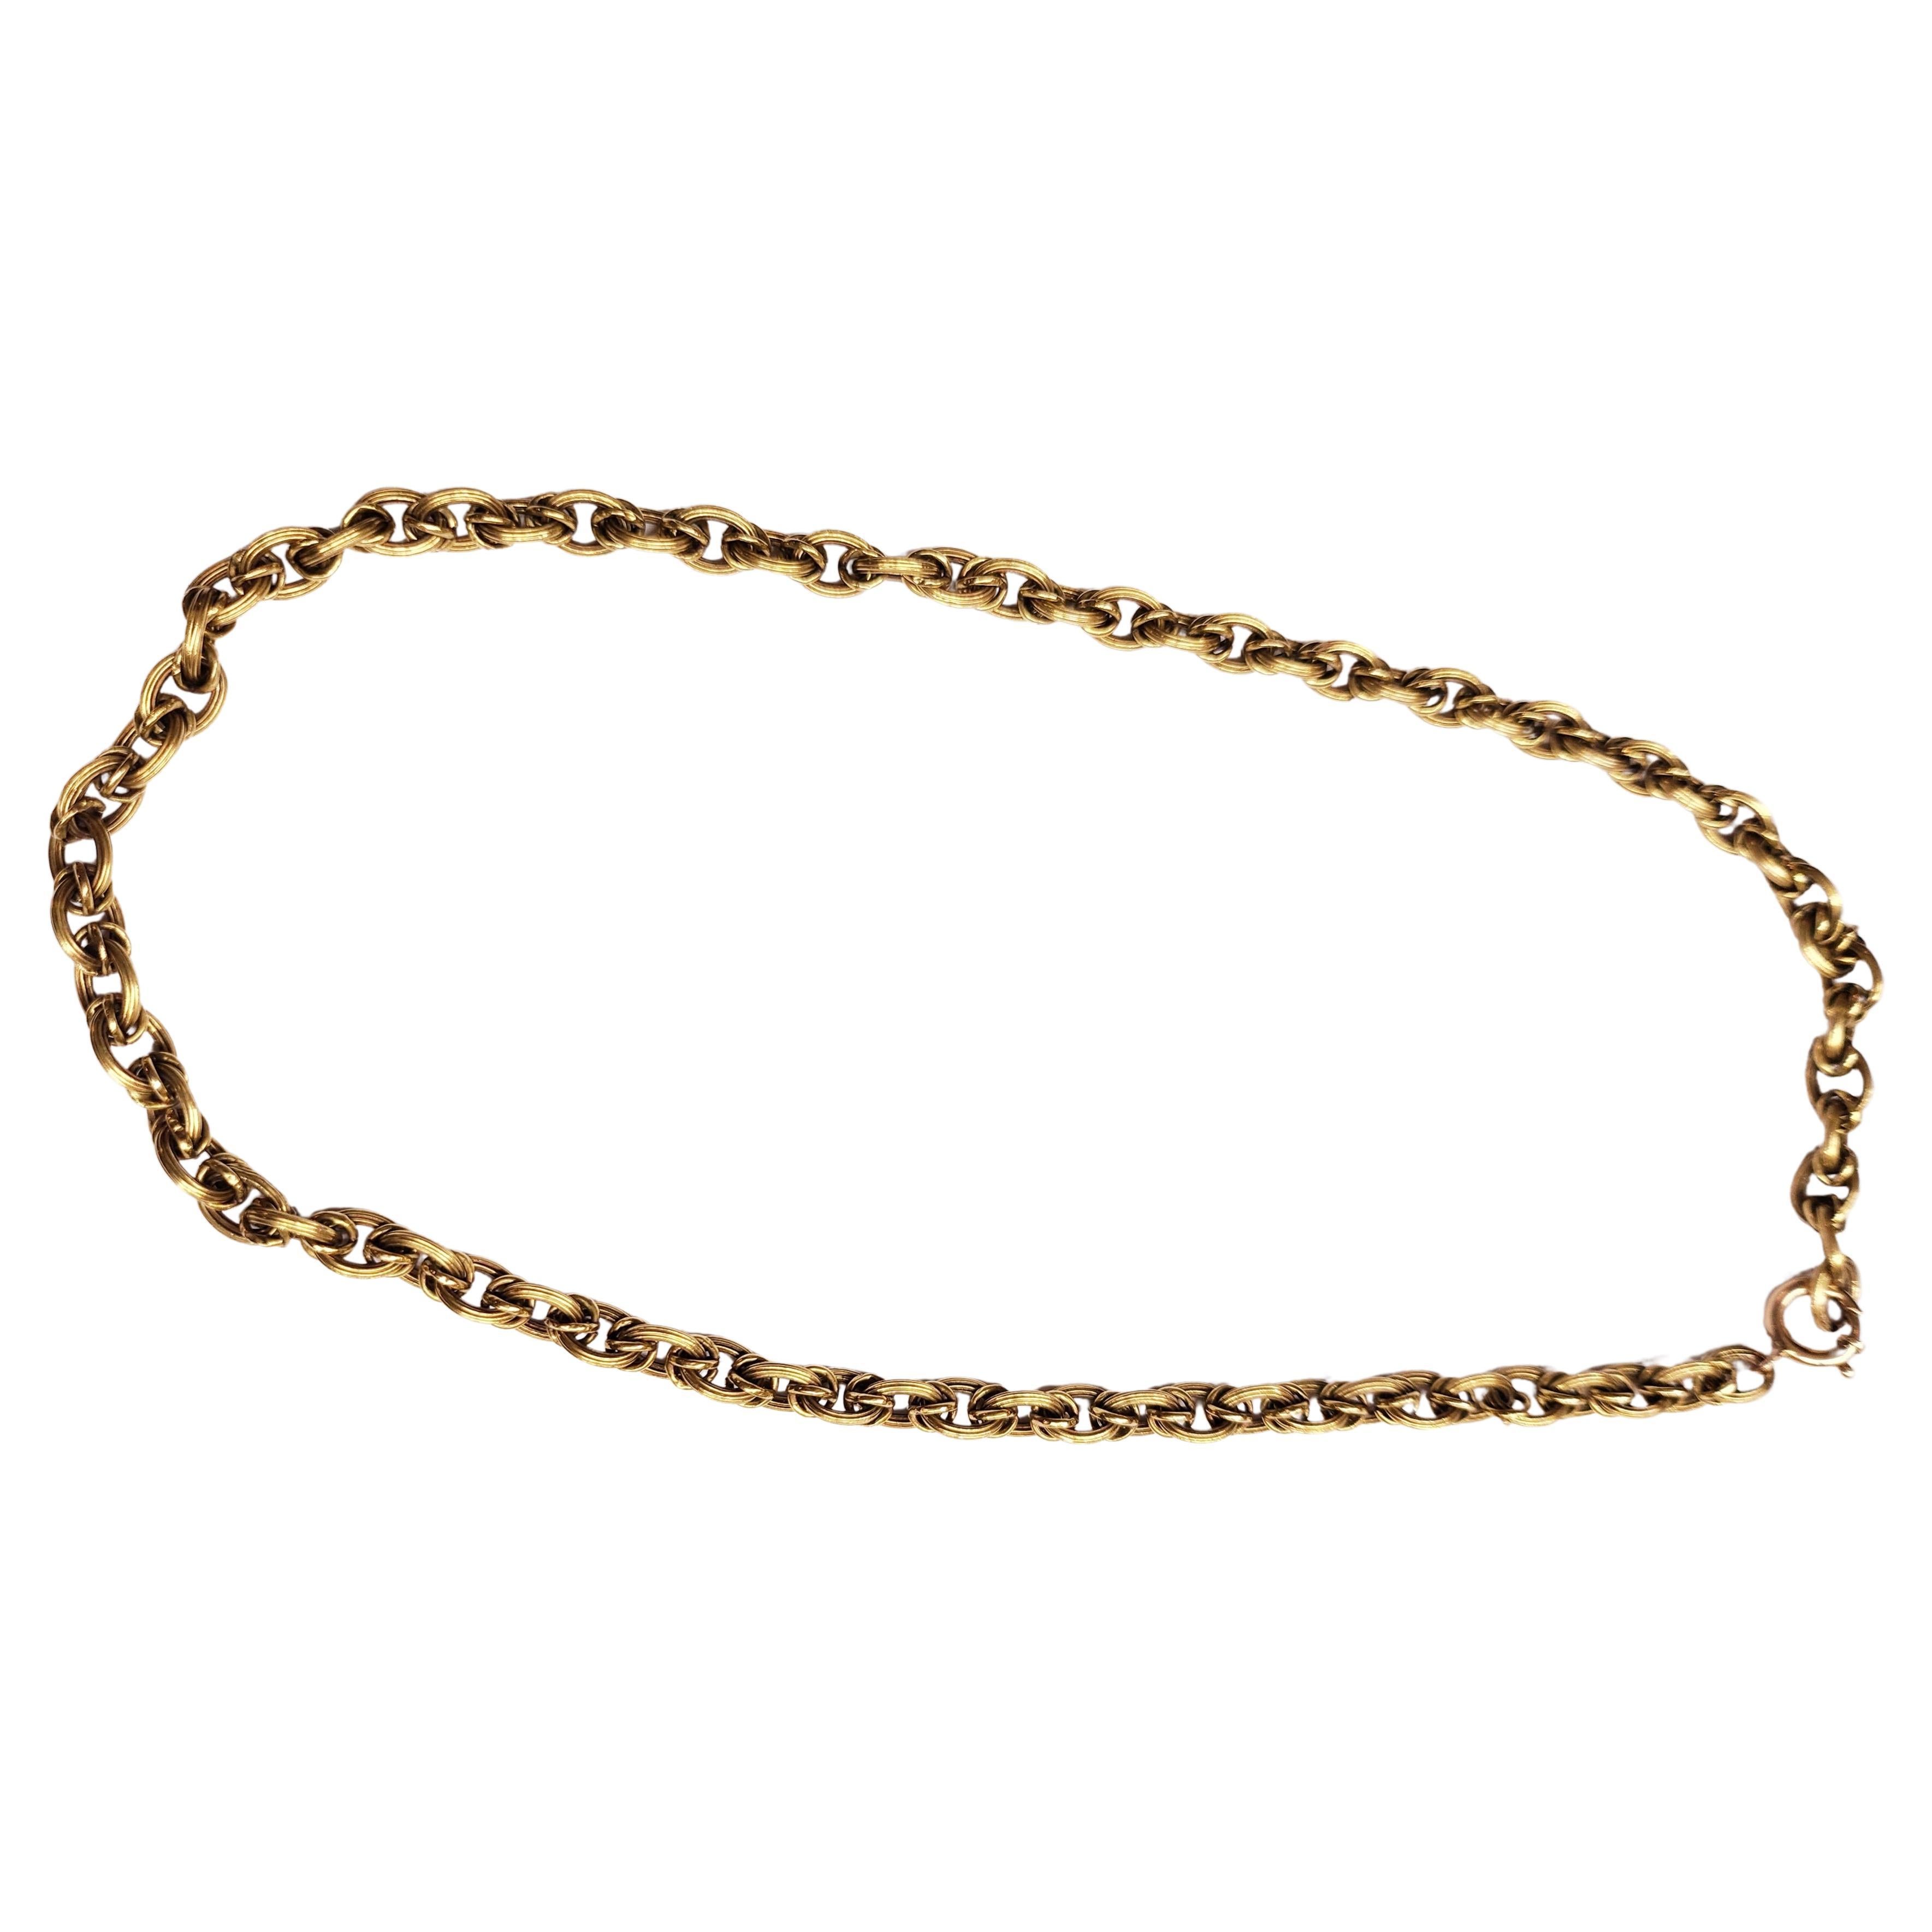 Antique Link Chain Russian Gold Necklace 1